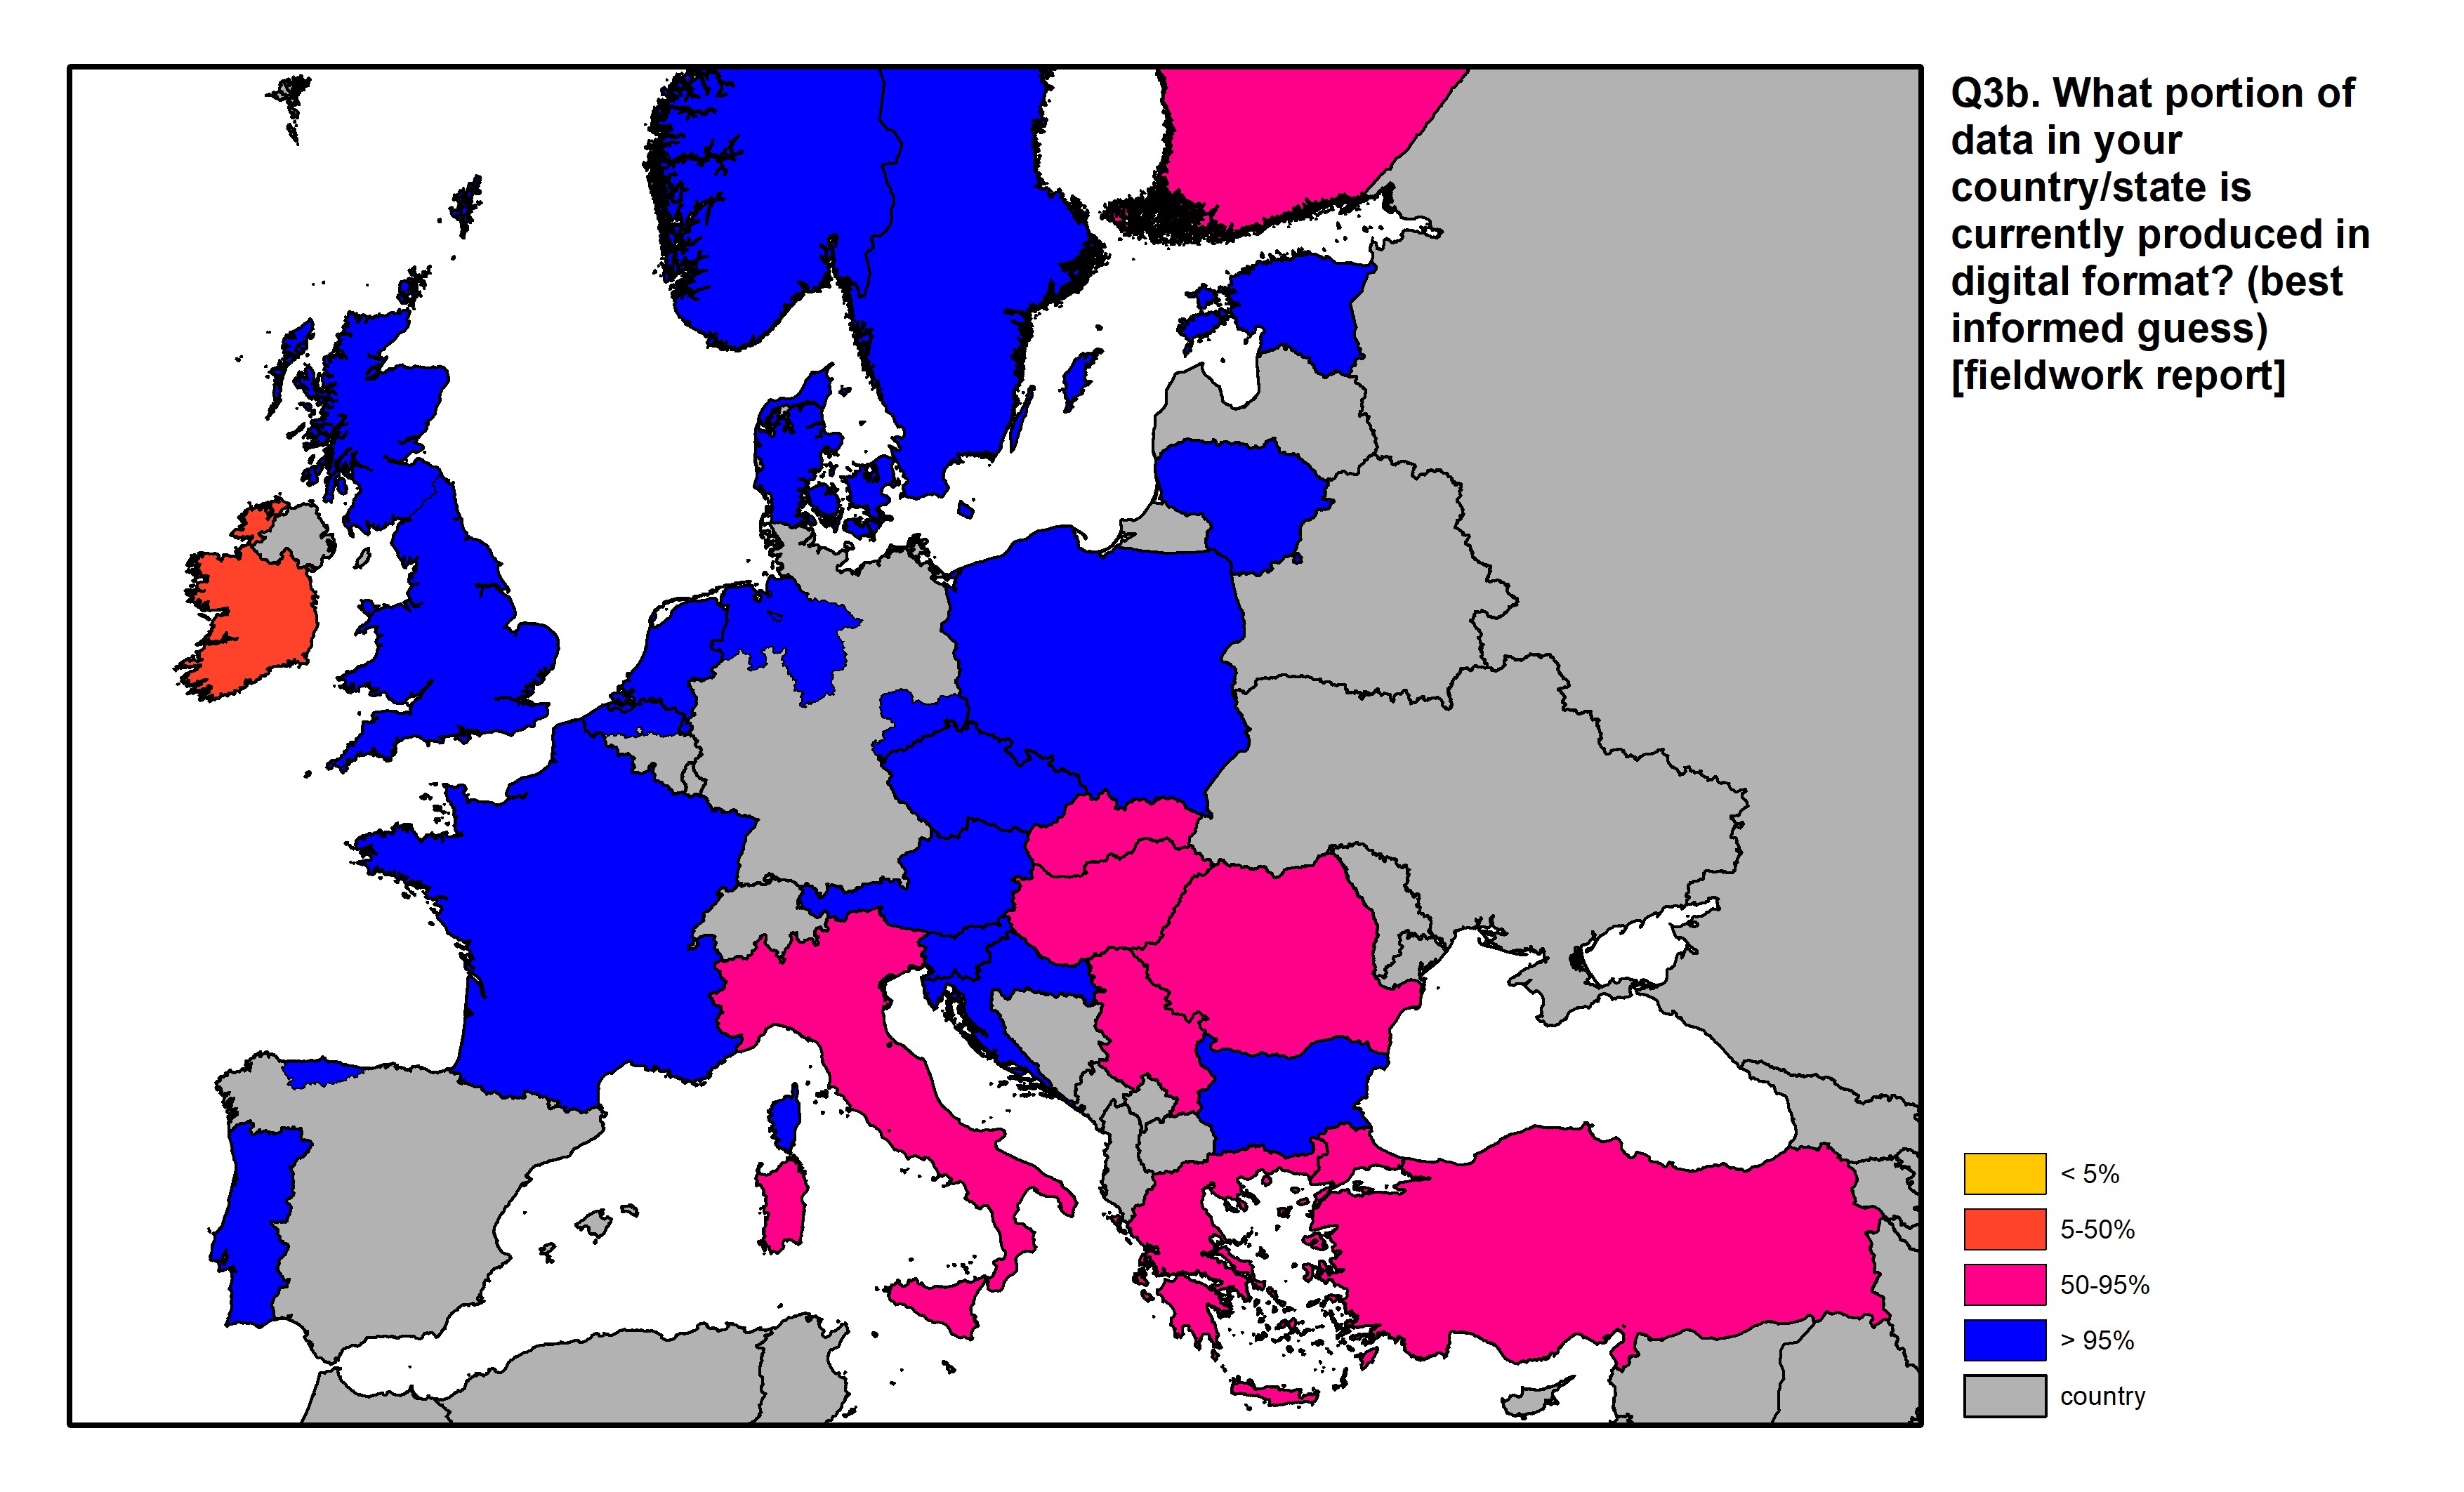 Figure 9: a map of Europe showing countries and regions in colour based on response rates to the survey question.